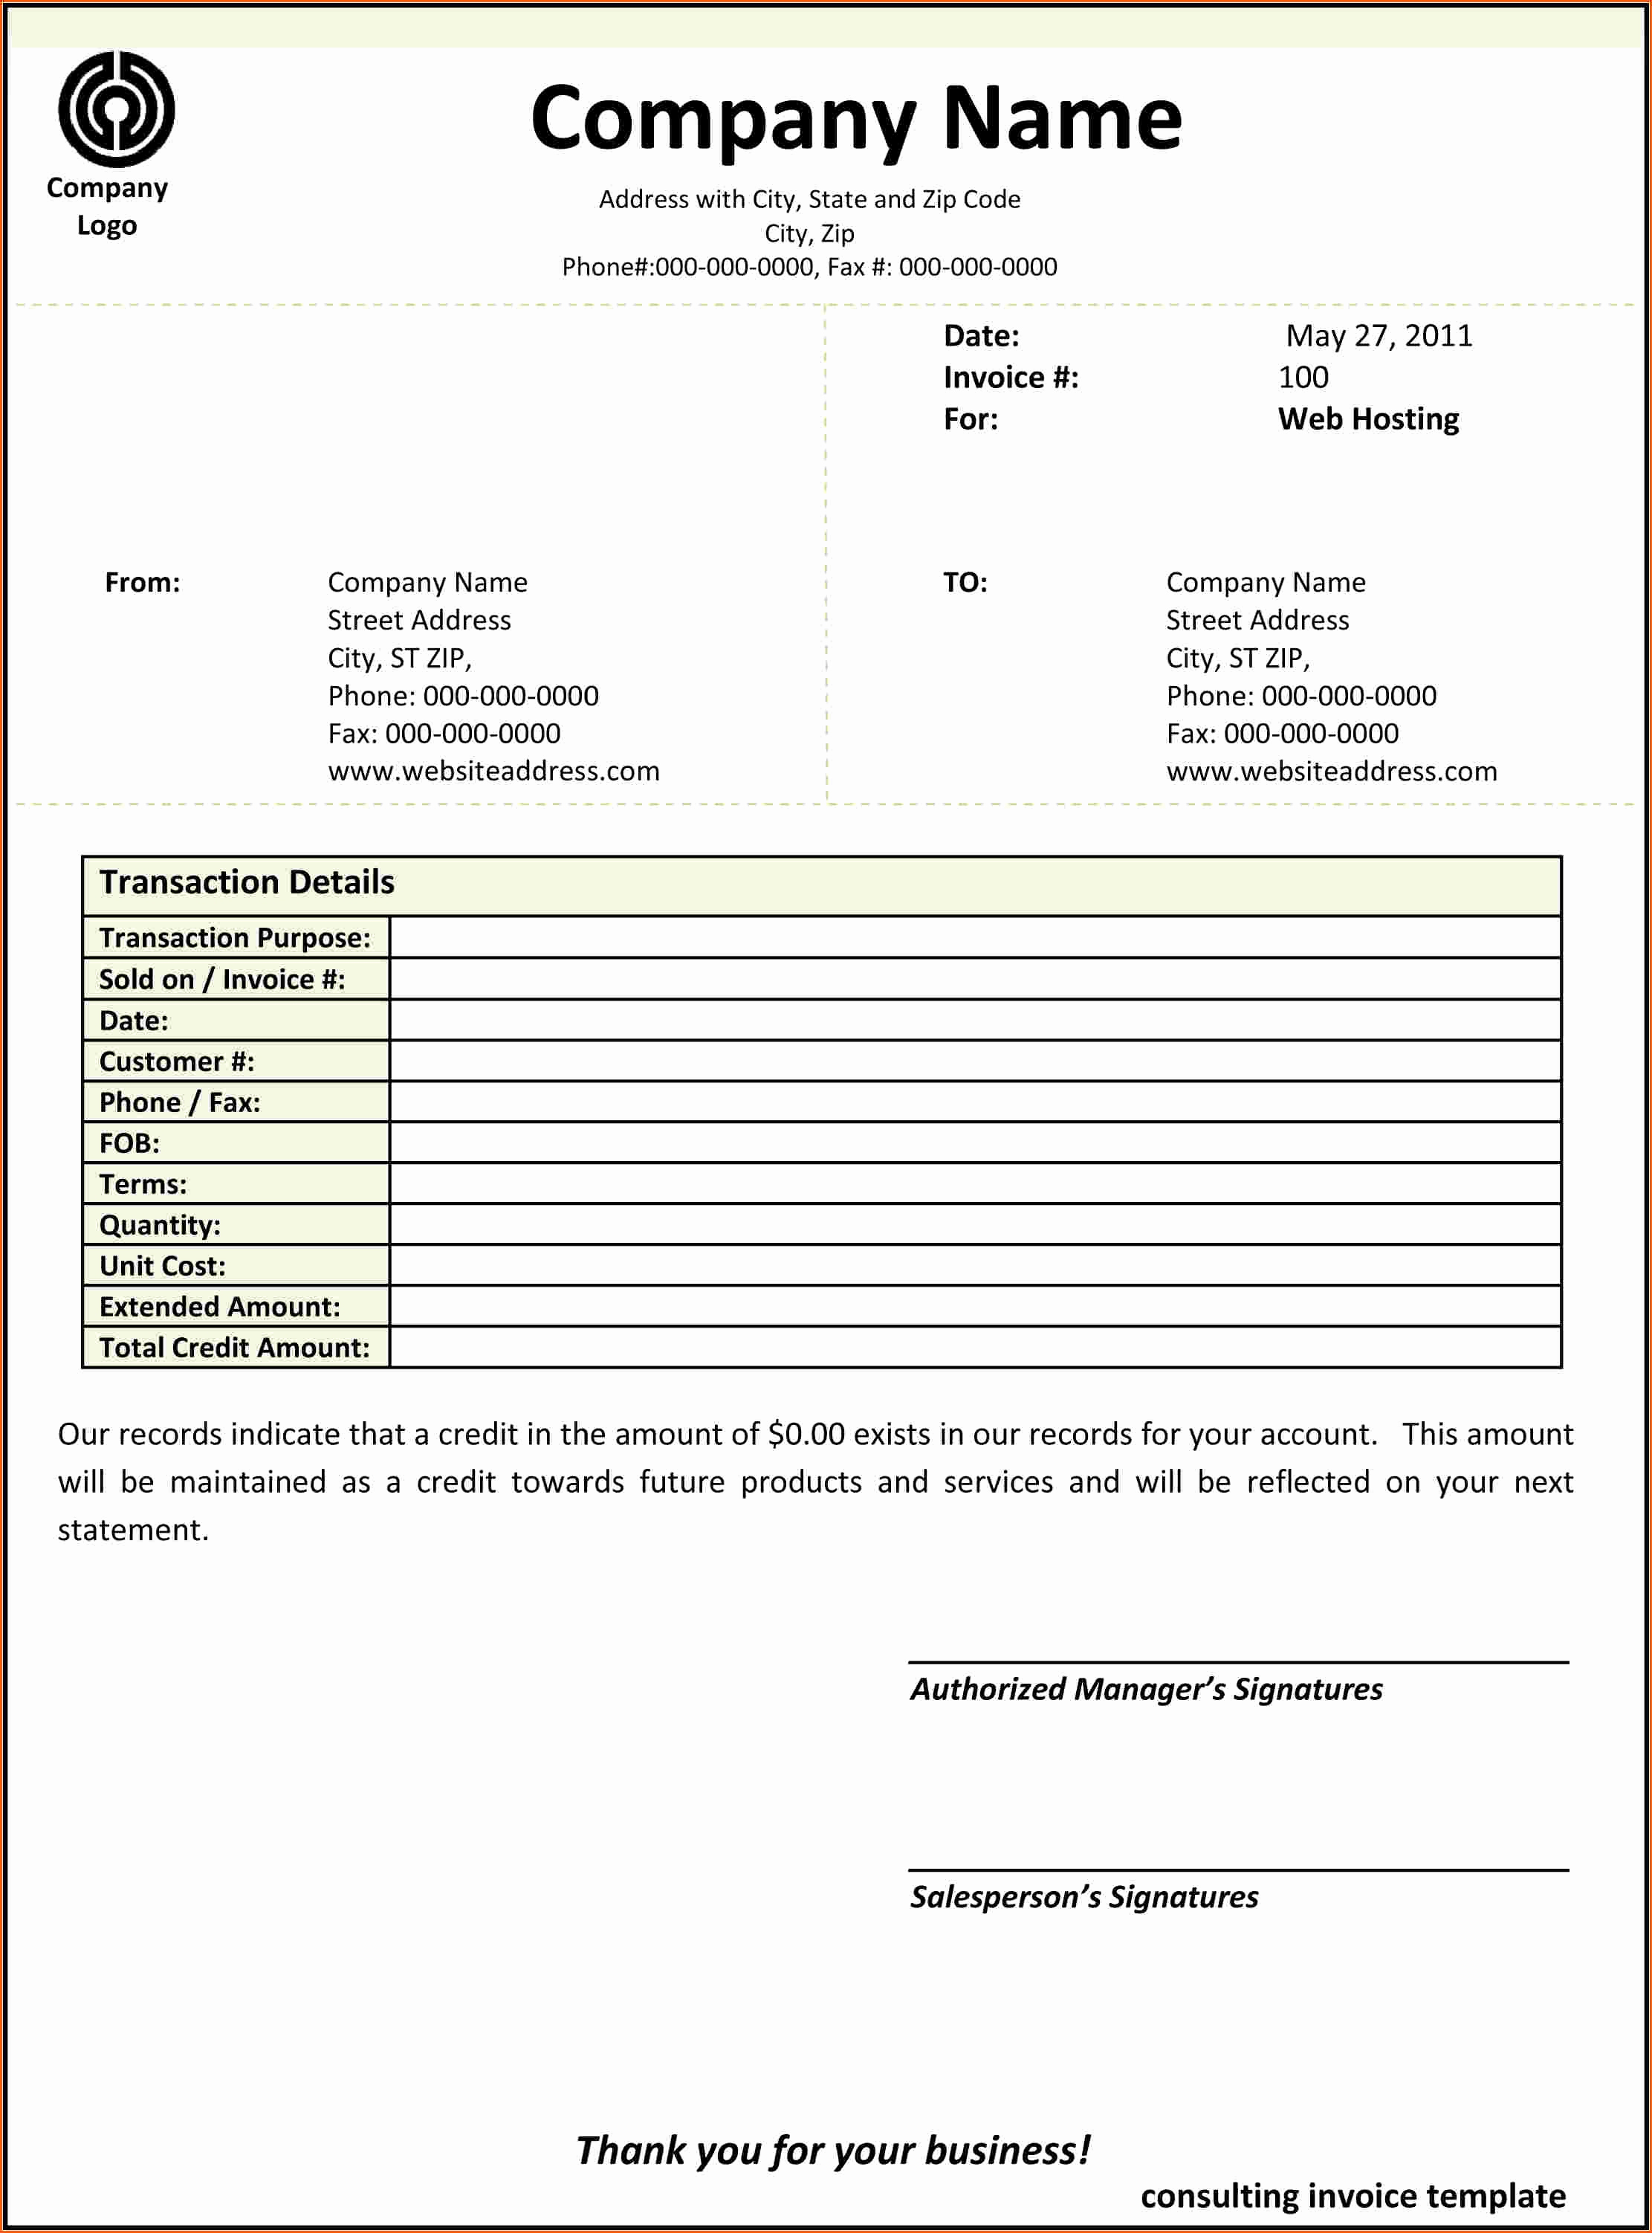 Invoice Template Consulting Work Consultant Invoice Template Word Inside Consulting Invoice